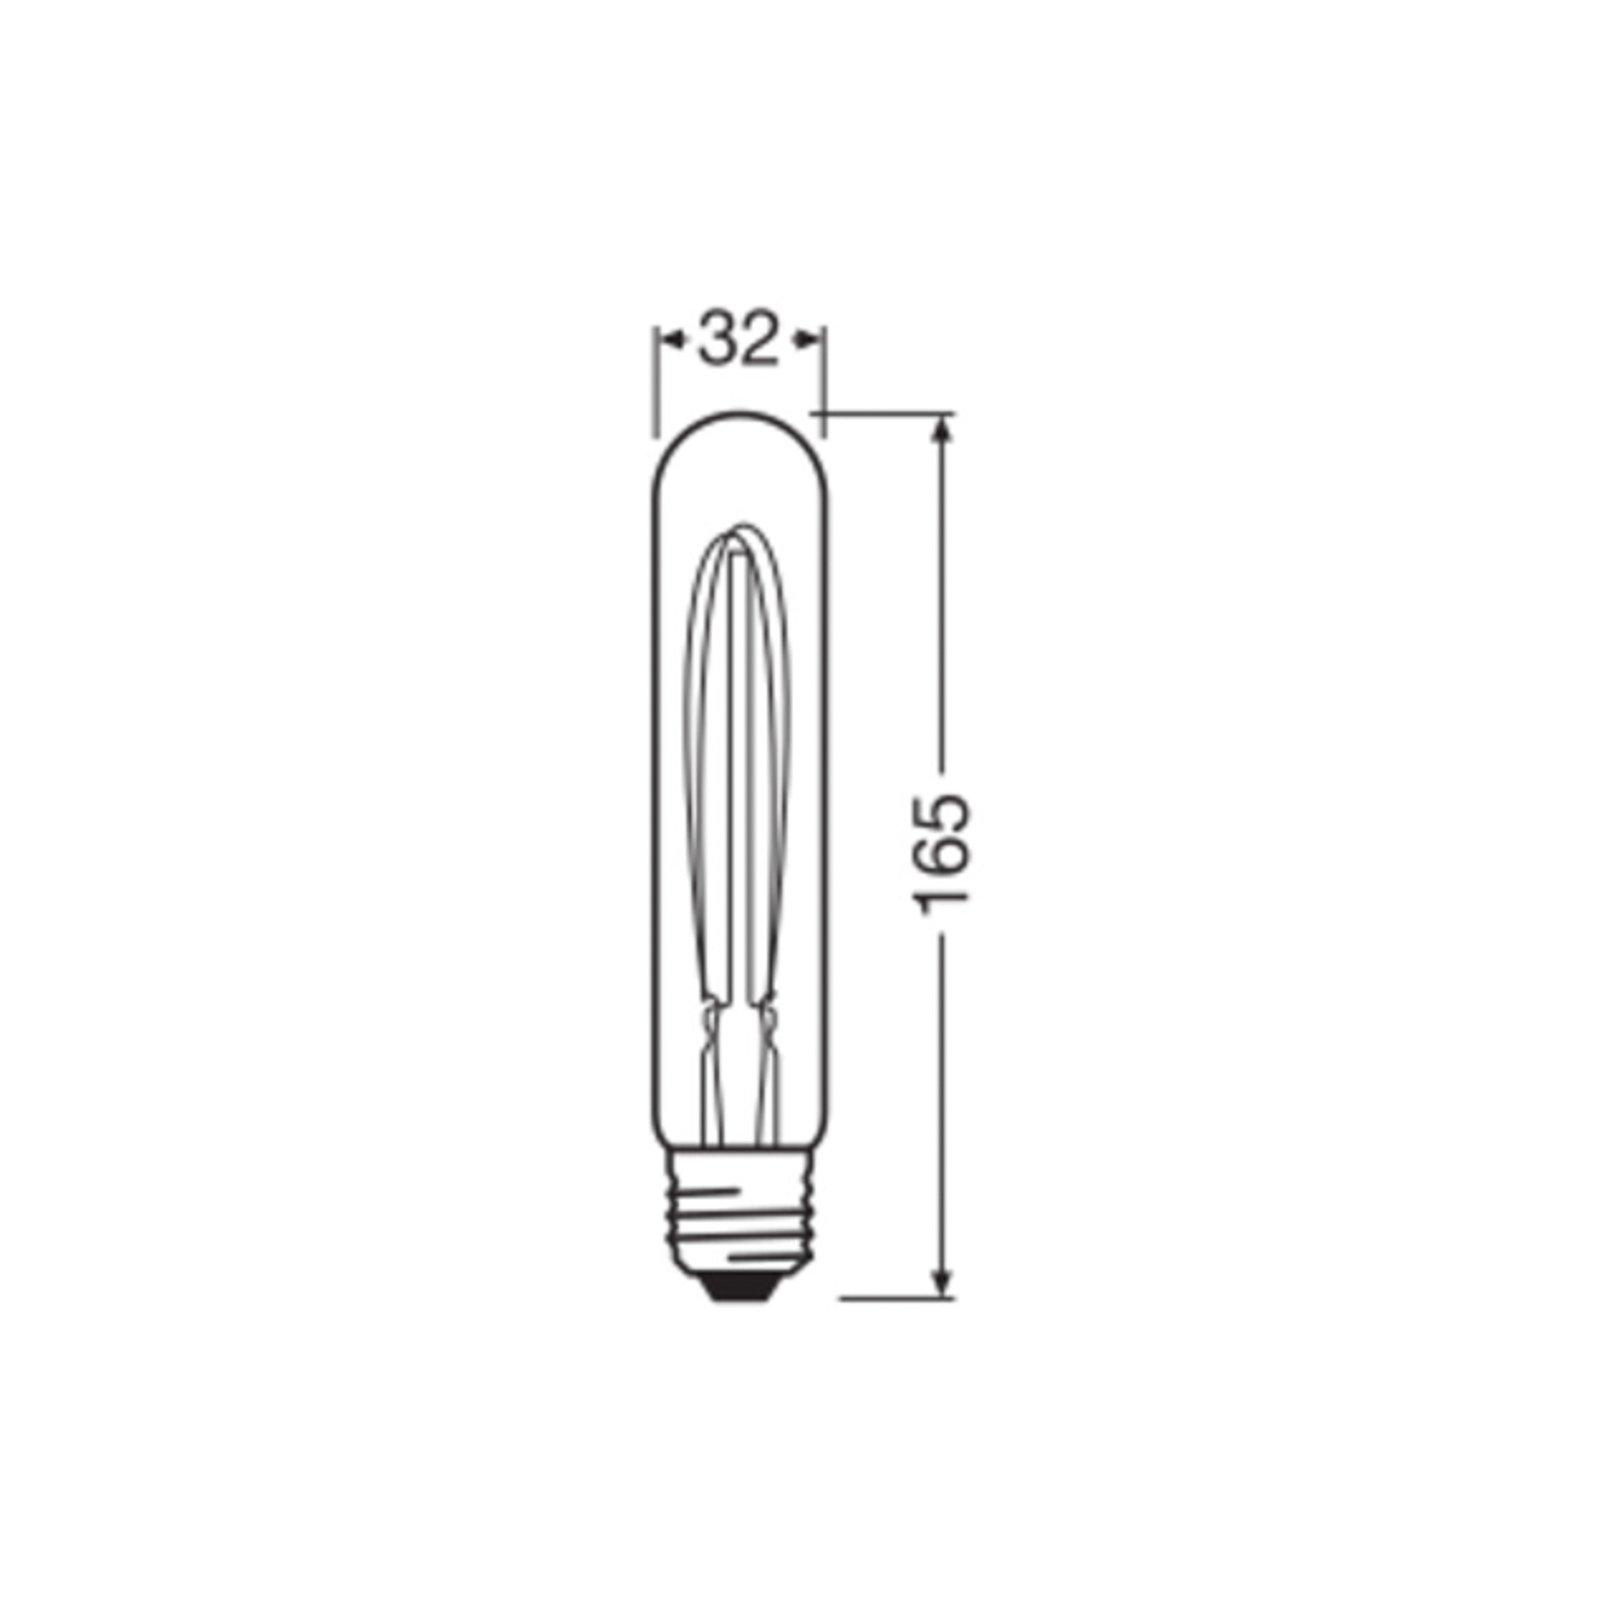 OSRAM LED Vintage 1906, tube, gold, E27, 4.8 W, 822, dimmable.